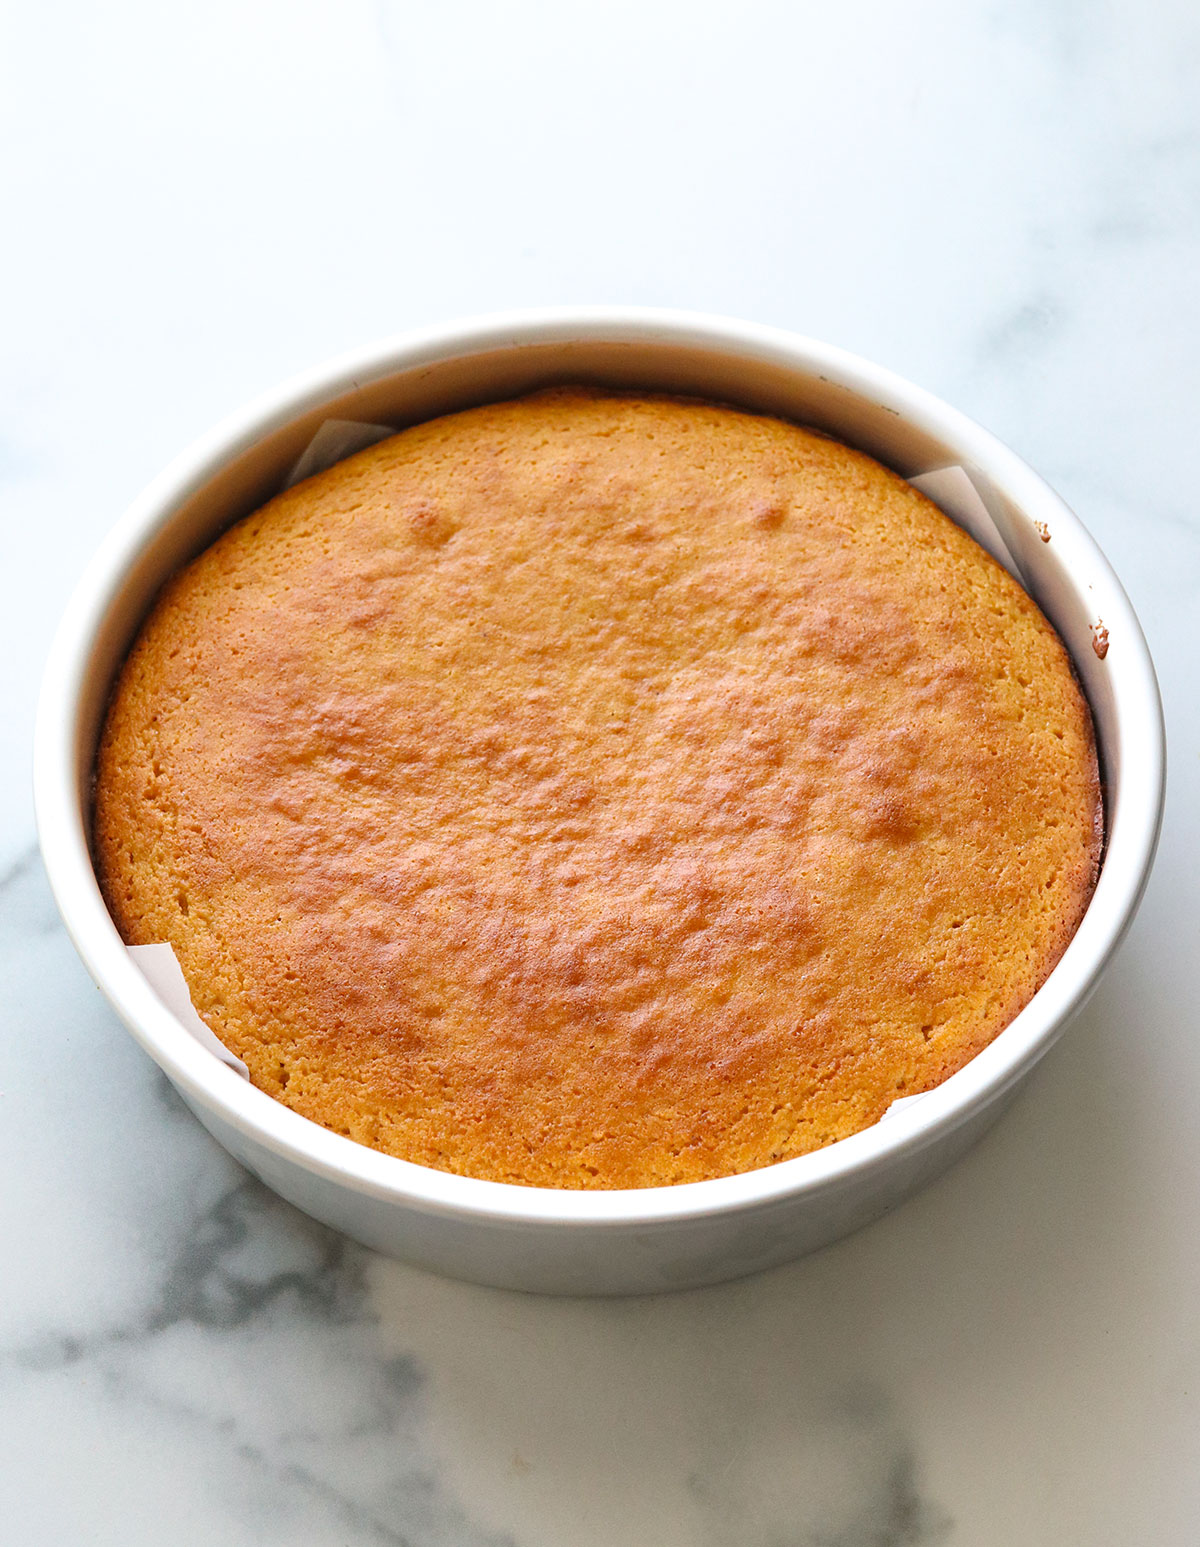 almond flour cake baked in an 8-inch pan.